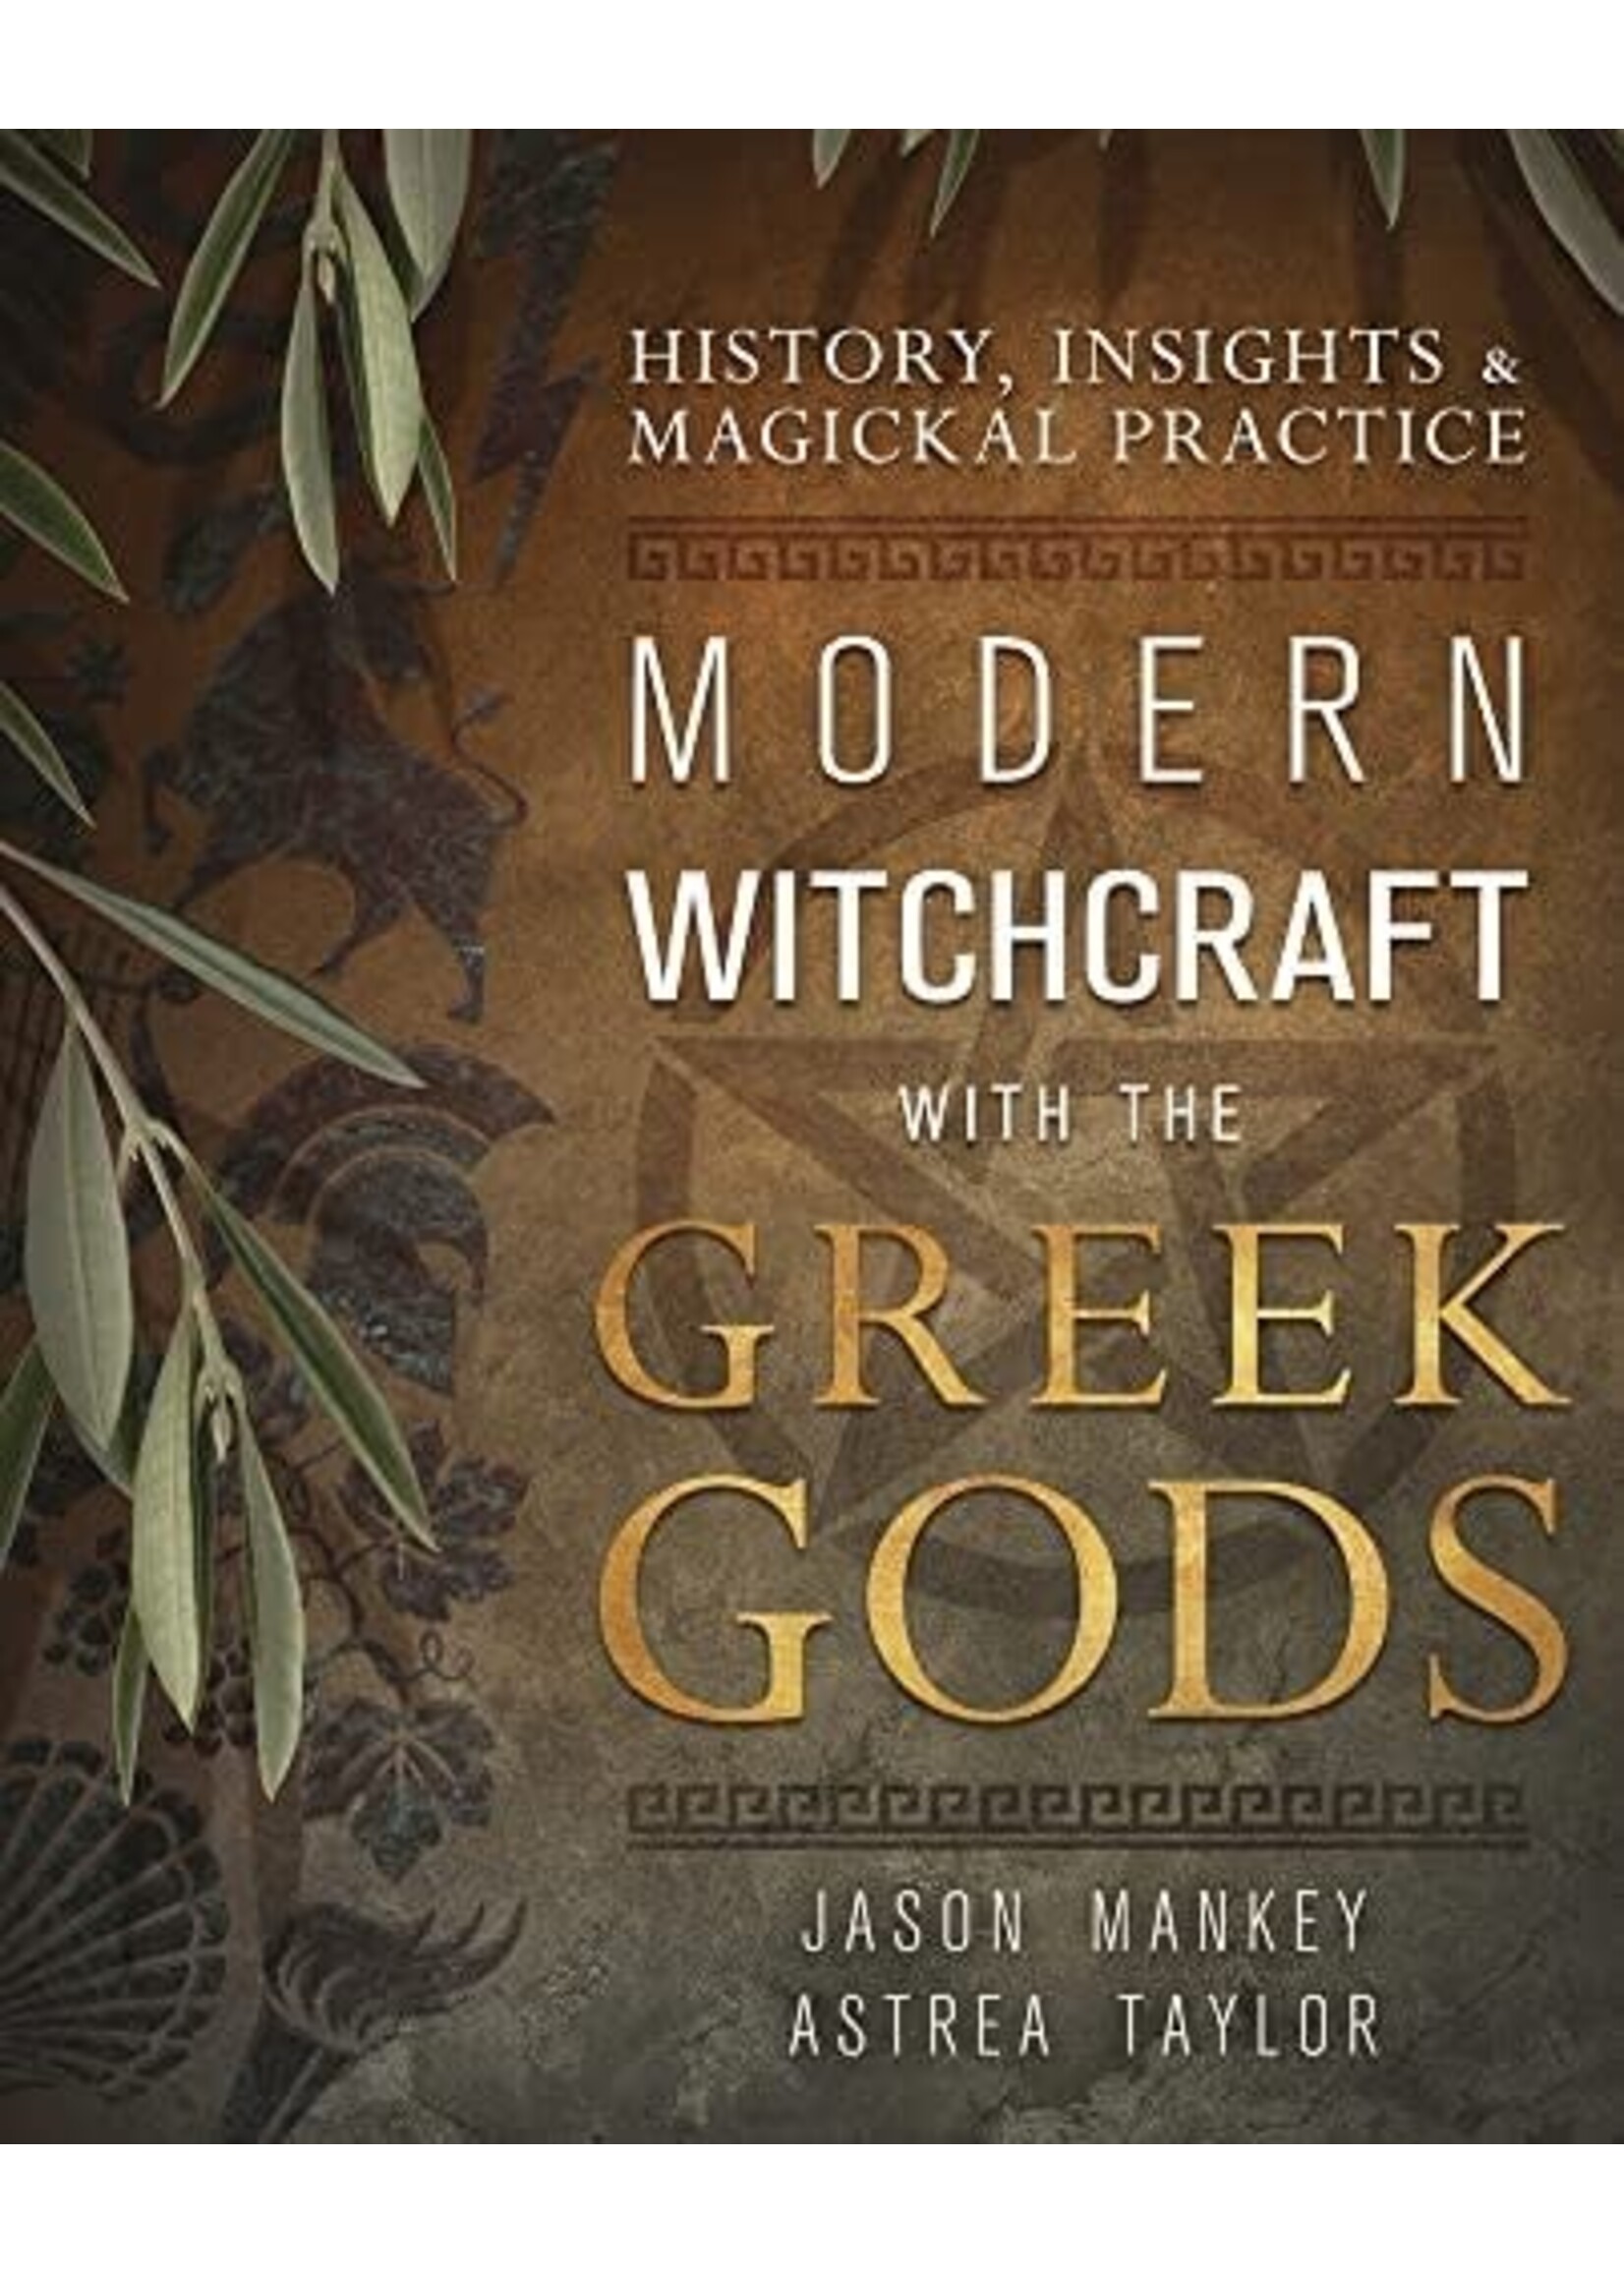 Modern Witchcraft with the Greek Gods by Jason Mankey and Astrea Taylor